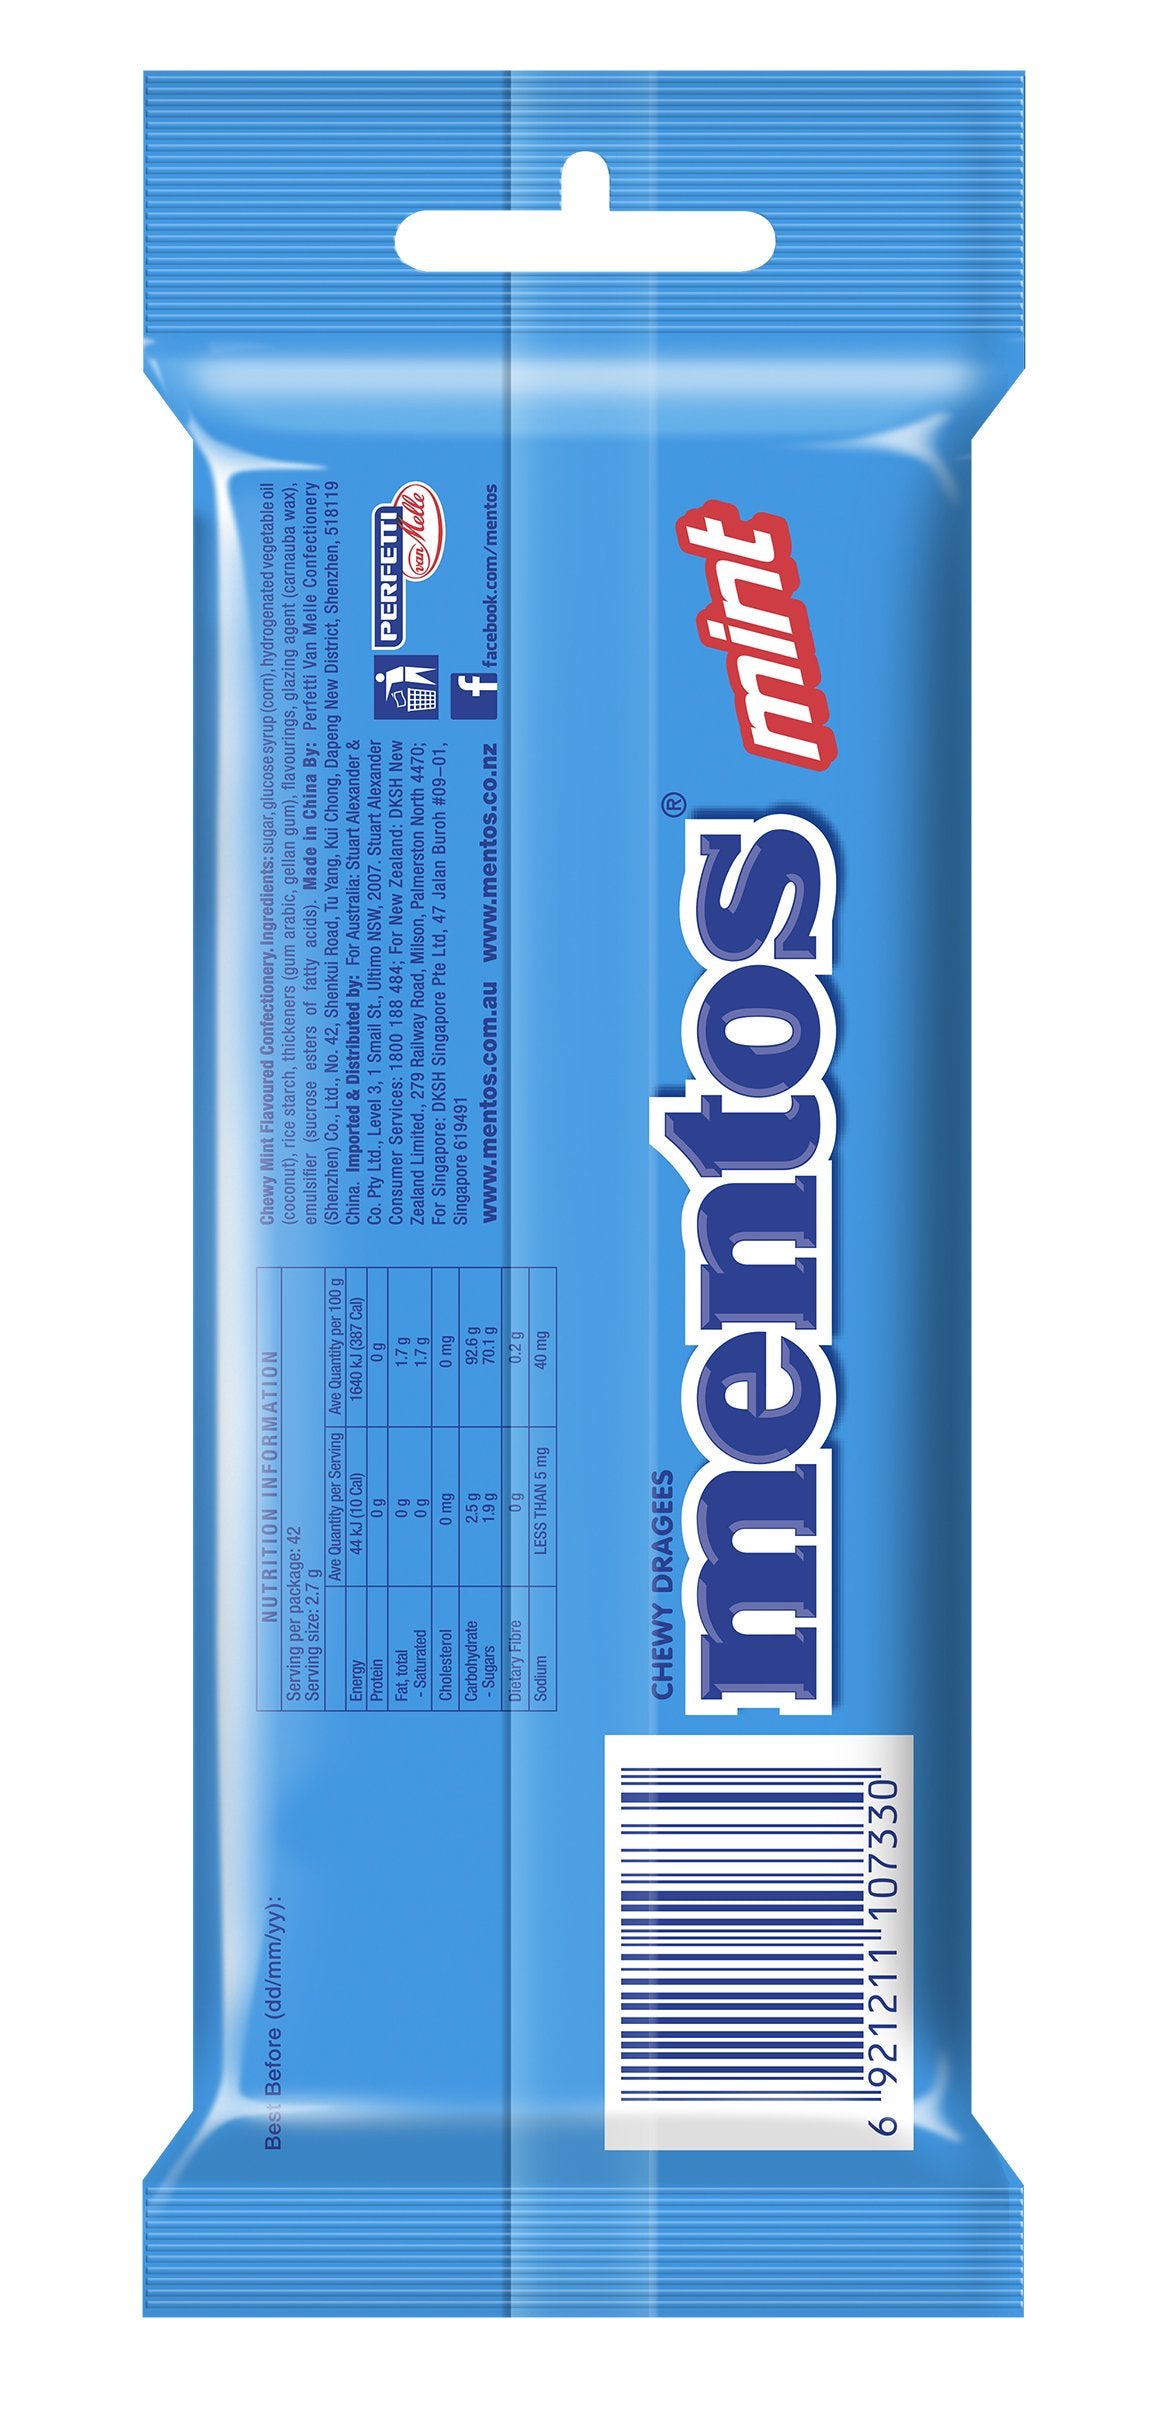 Mentos Mint Candy Roll 3 Pack (Box of 20)